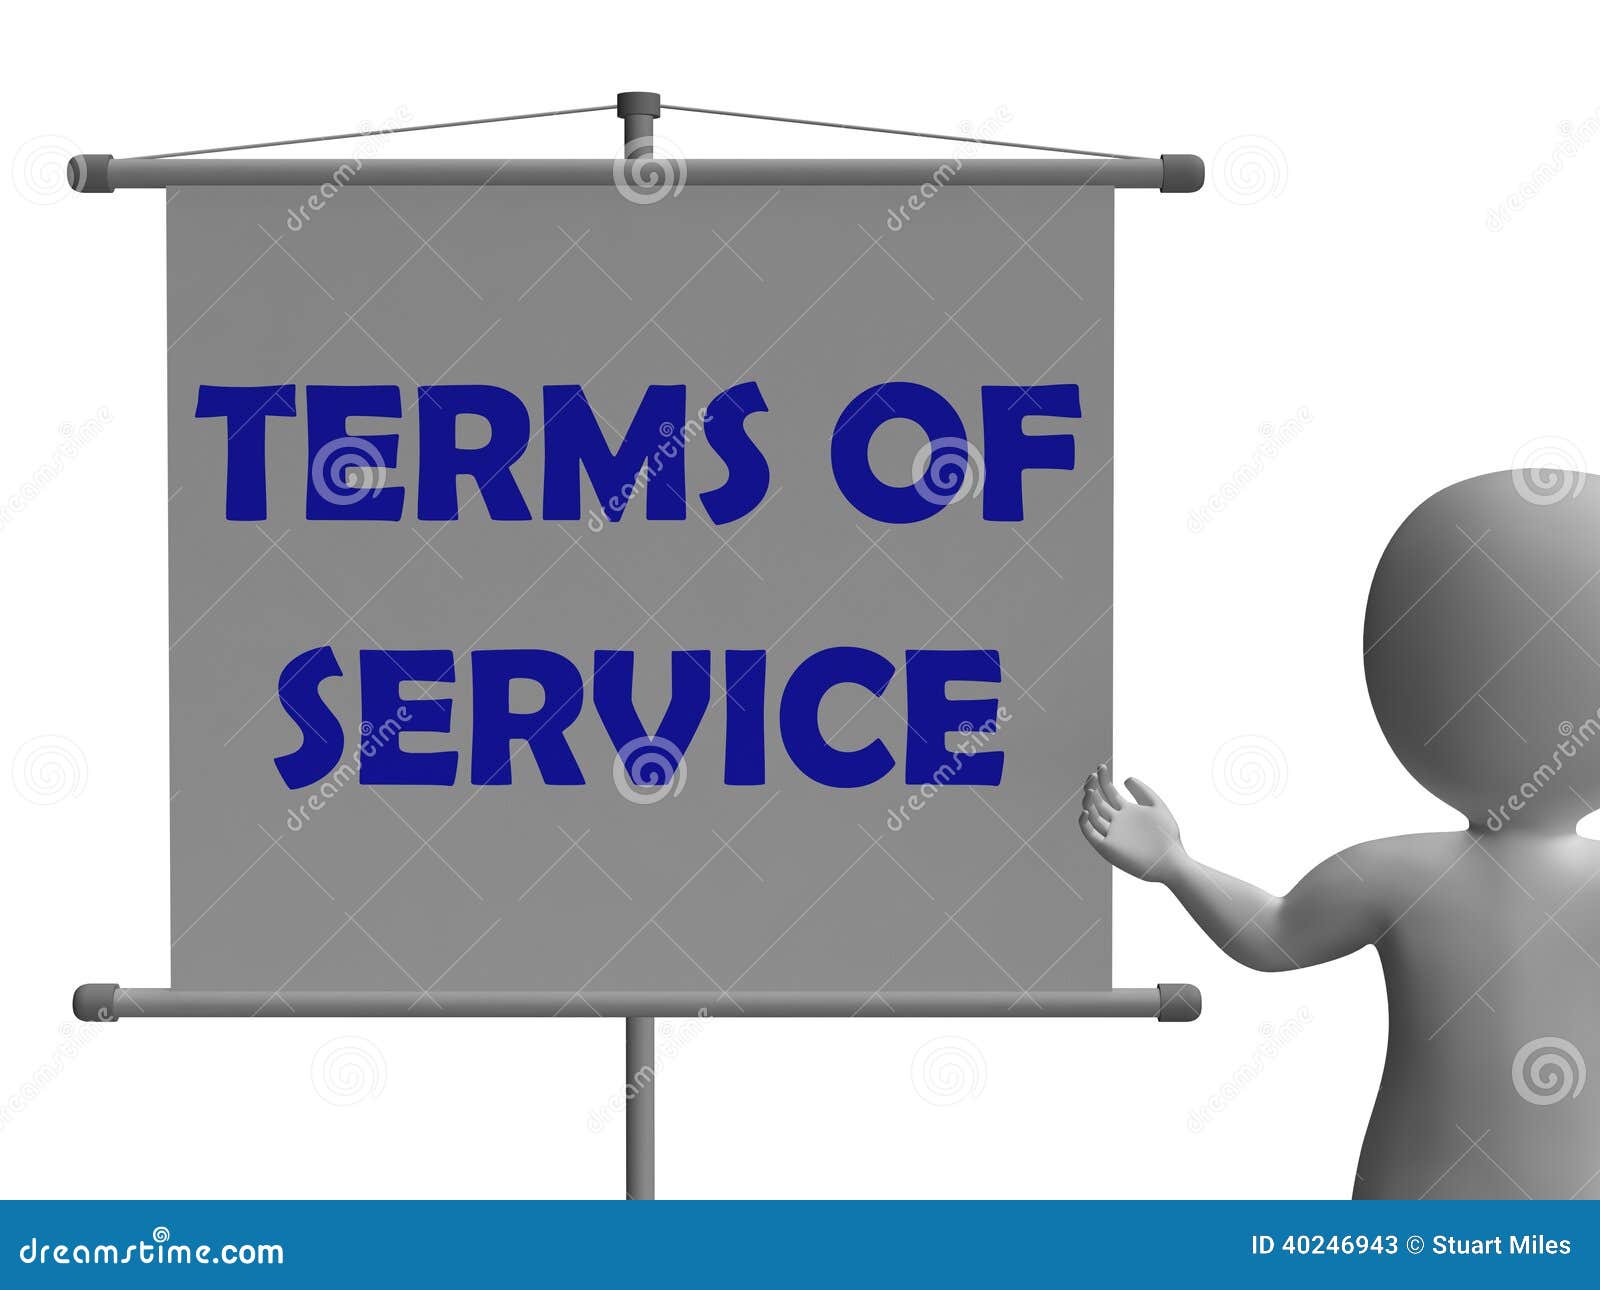 terms of service board shows legality and